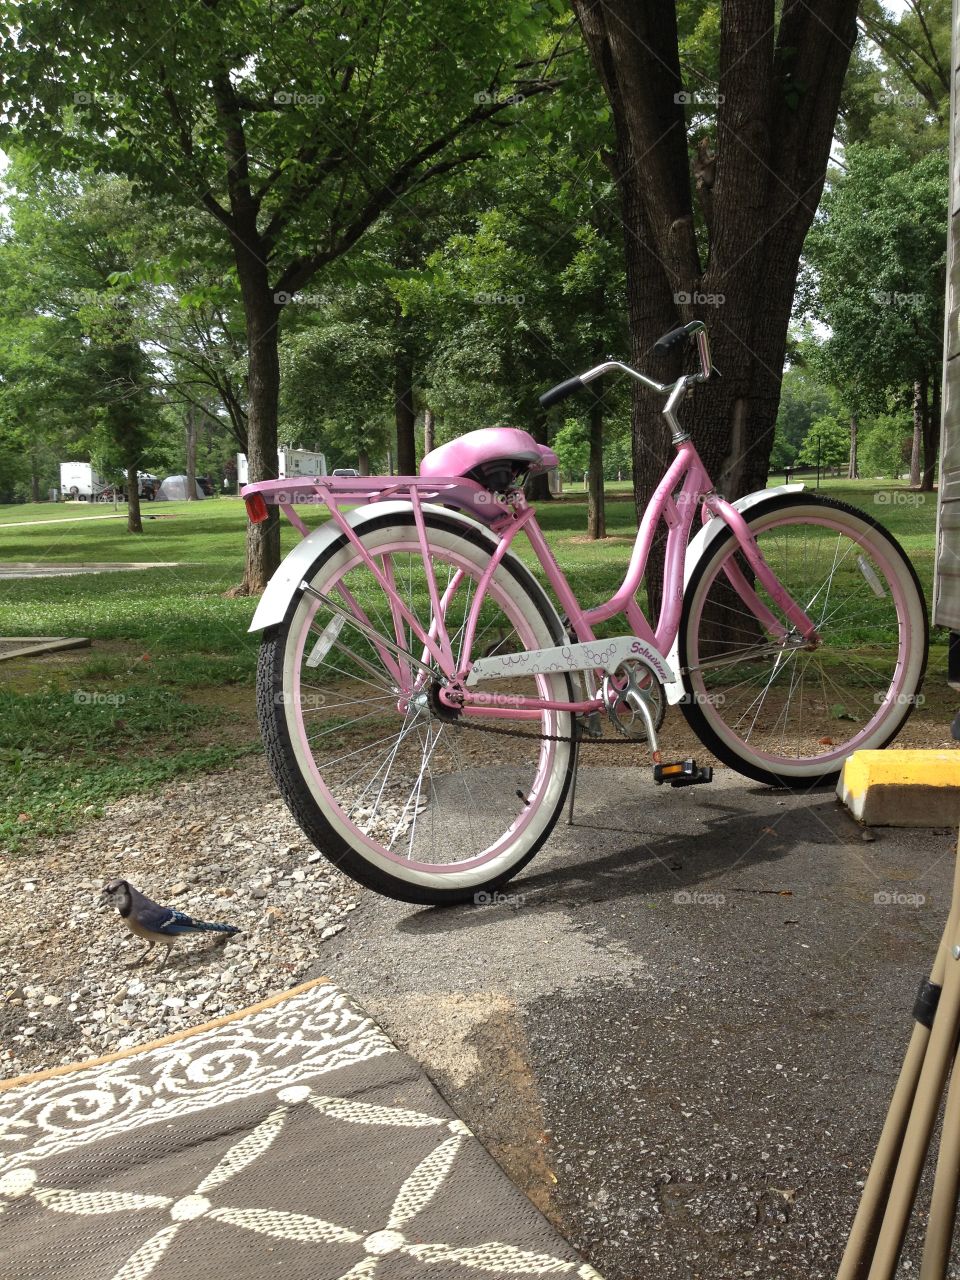 Blue jay meets pink cycle. Bird, blue jay, pink, bicycle